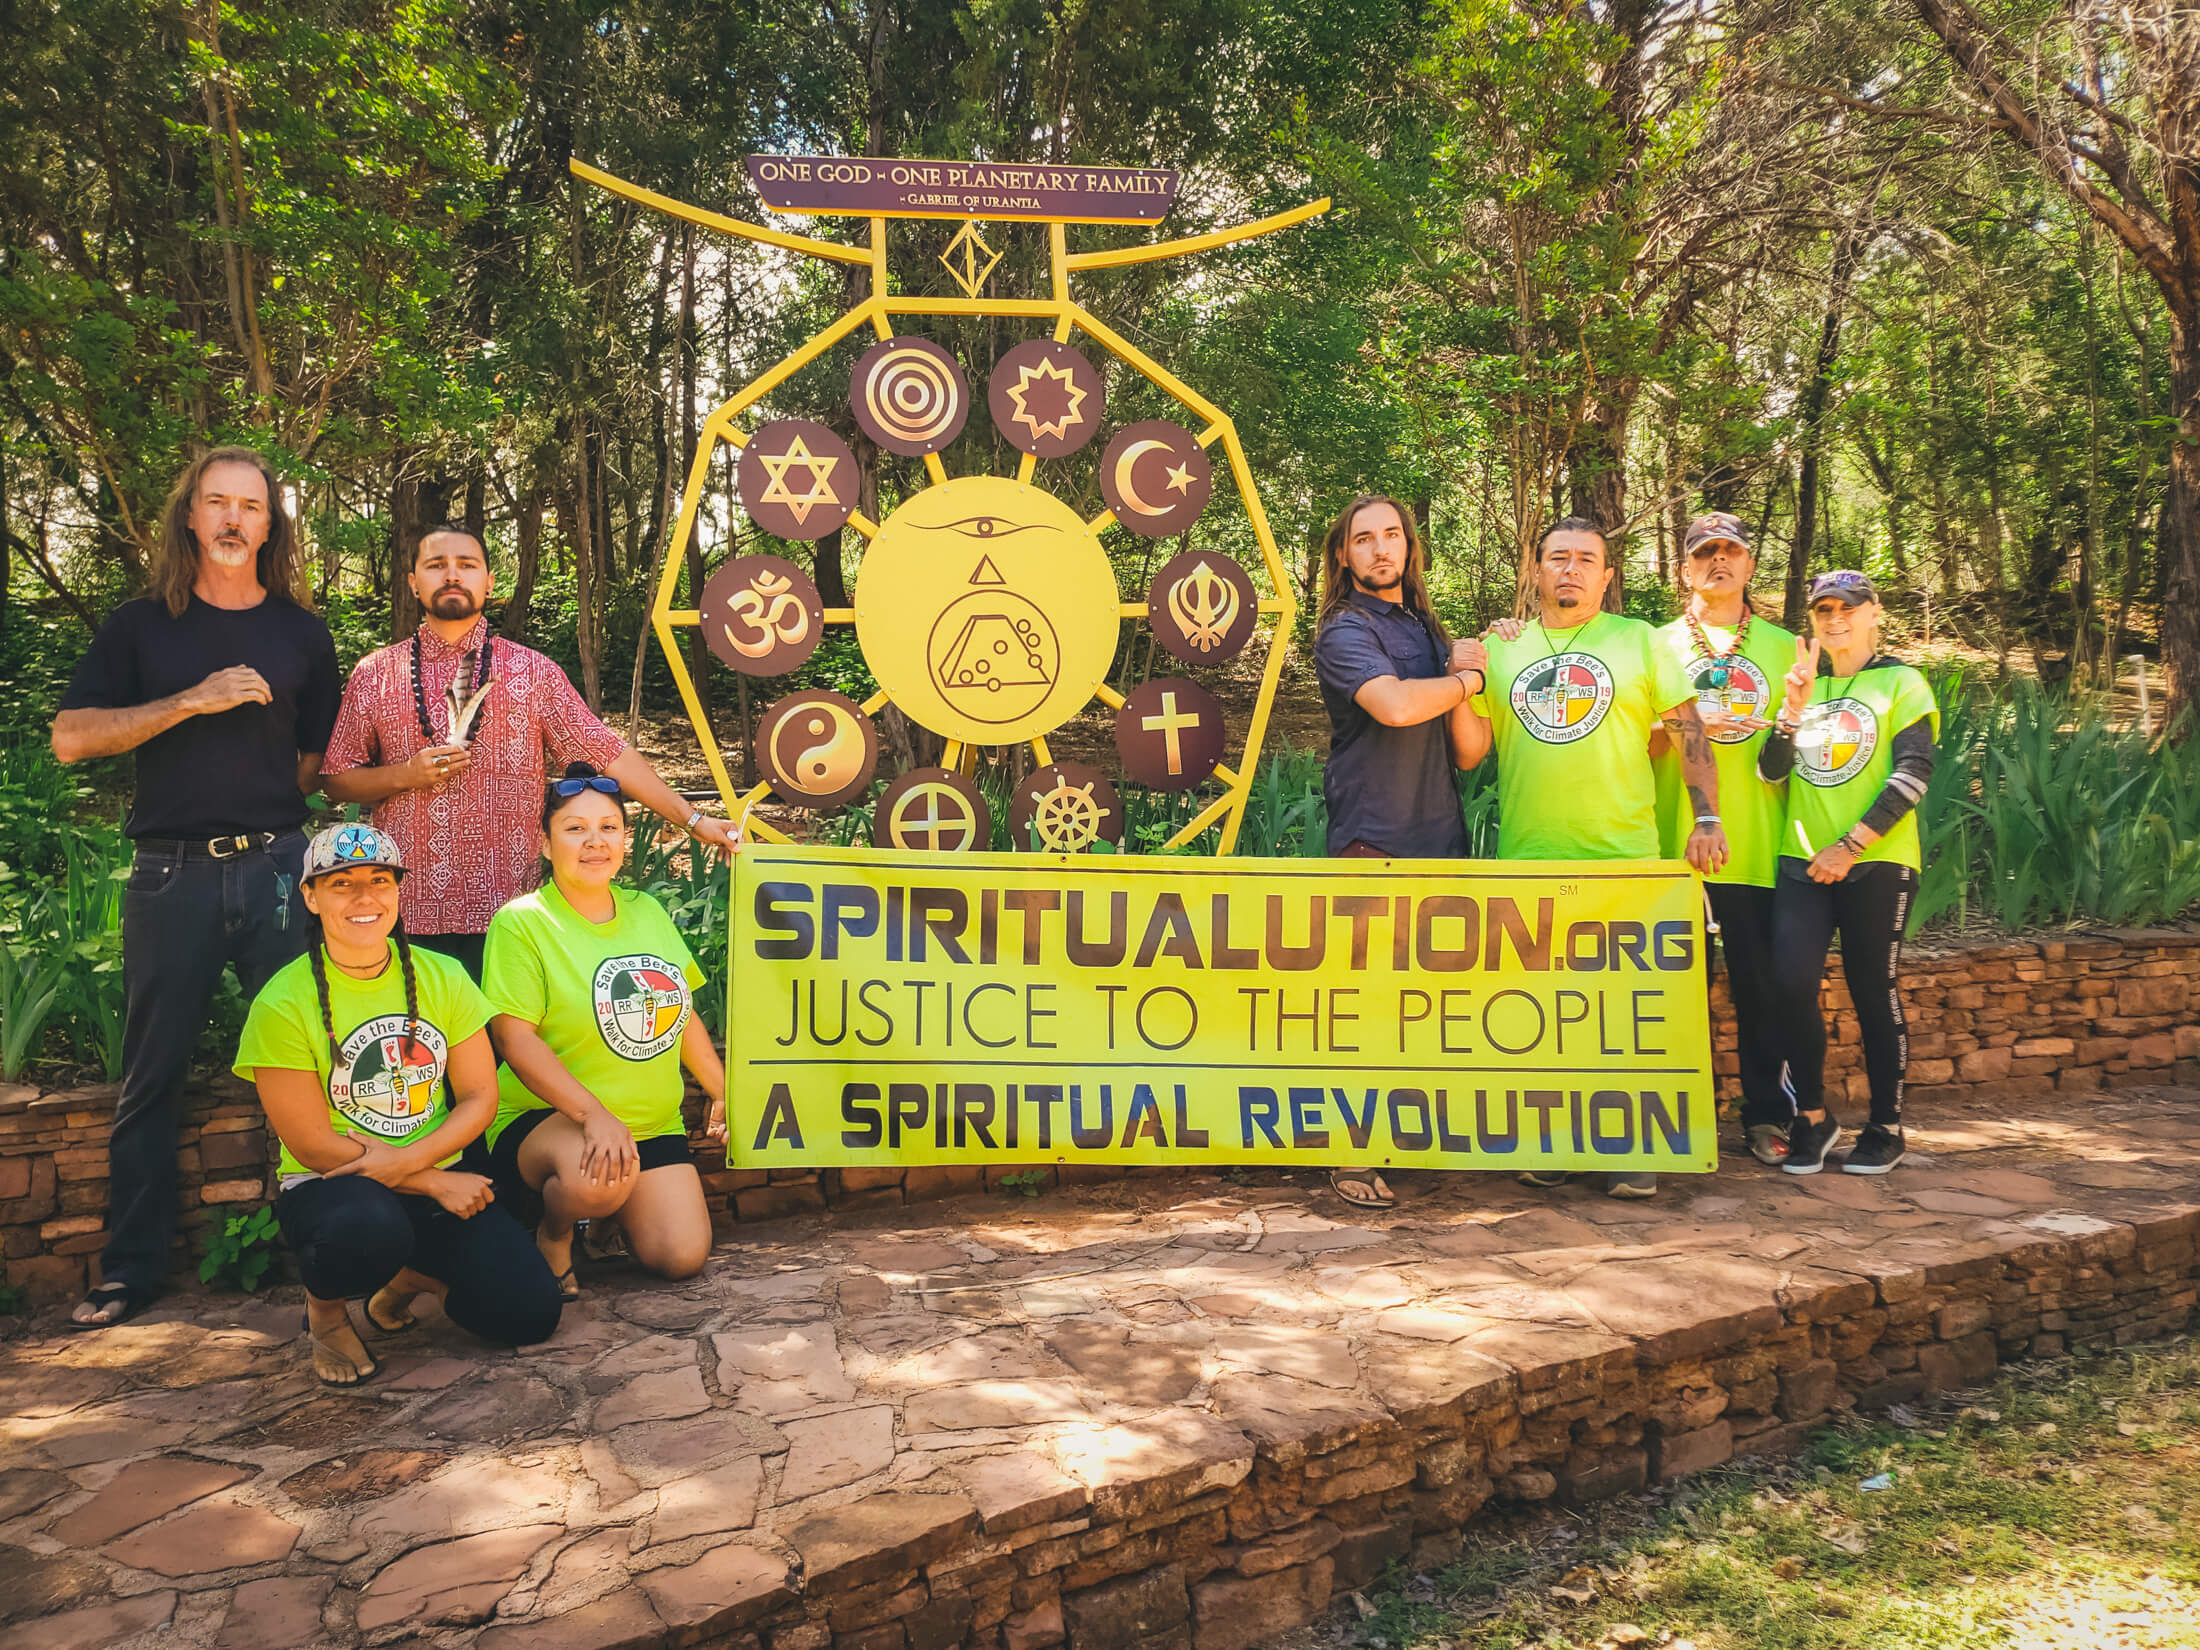 Camp Avalon Spiritual Nature Retreat Bulletin - We were blessed to join and support Chief Harry Good Wolf Kindness & Chief Bobby Wallace in Sedona this summer while on the national 